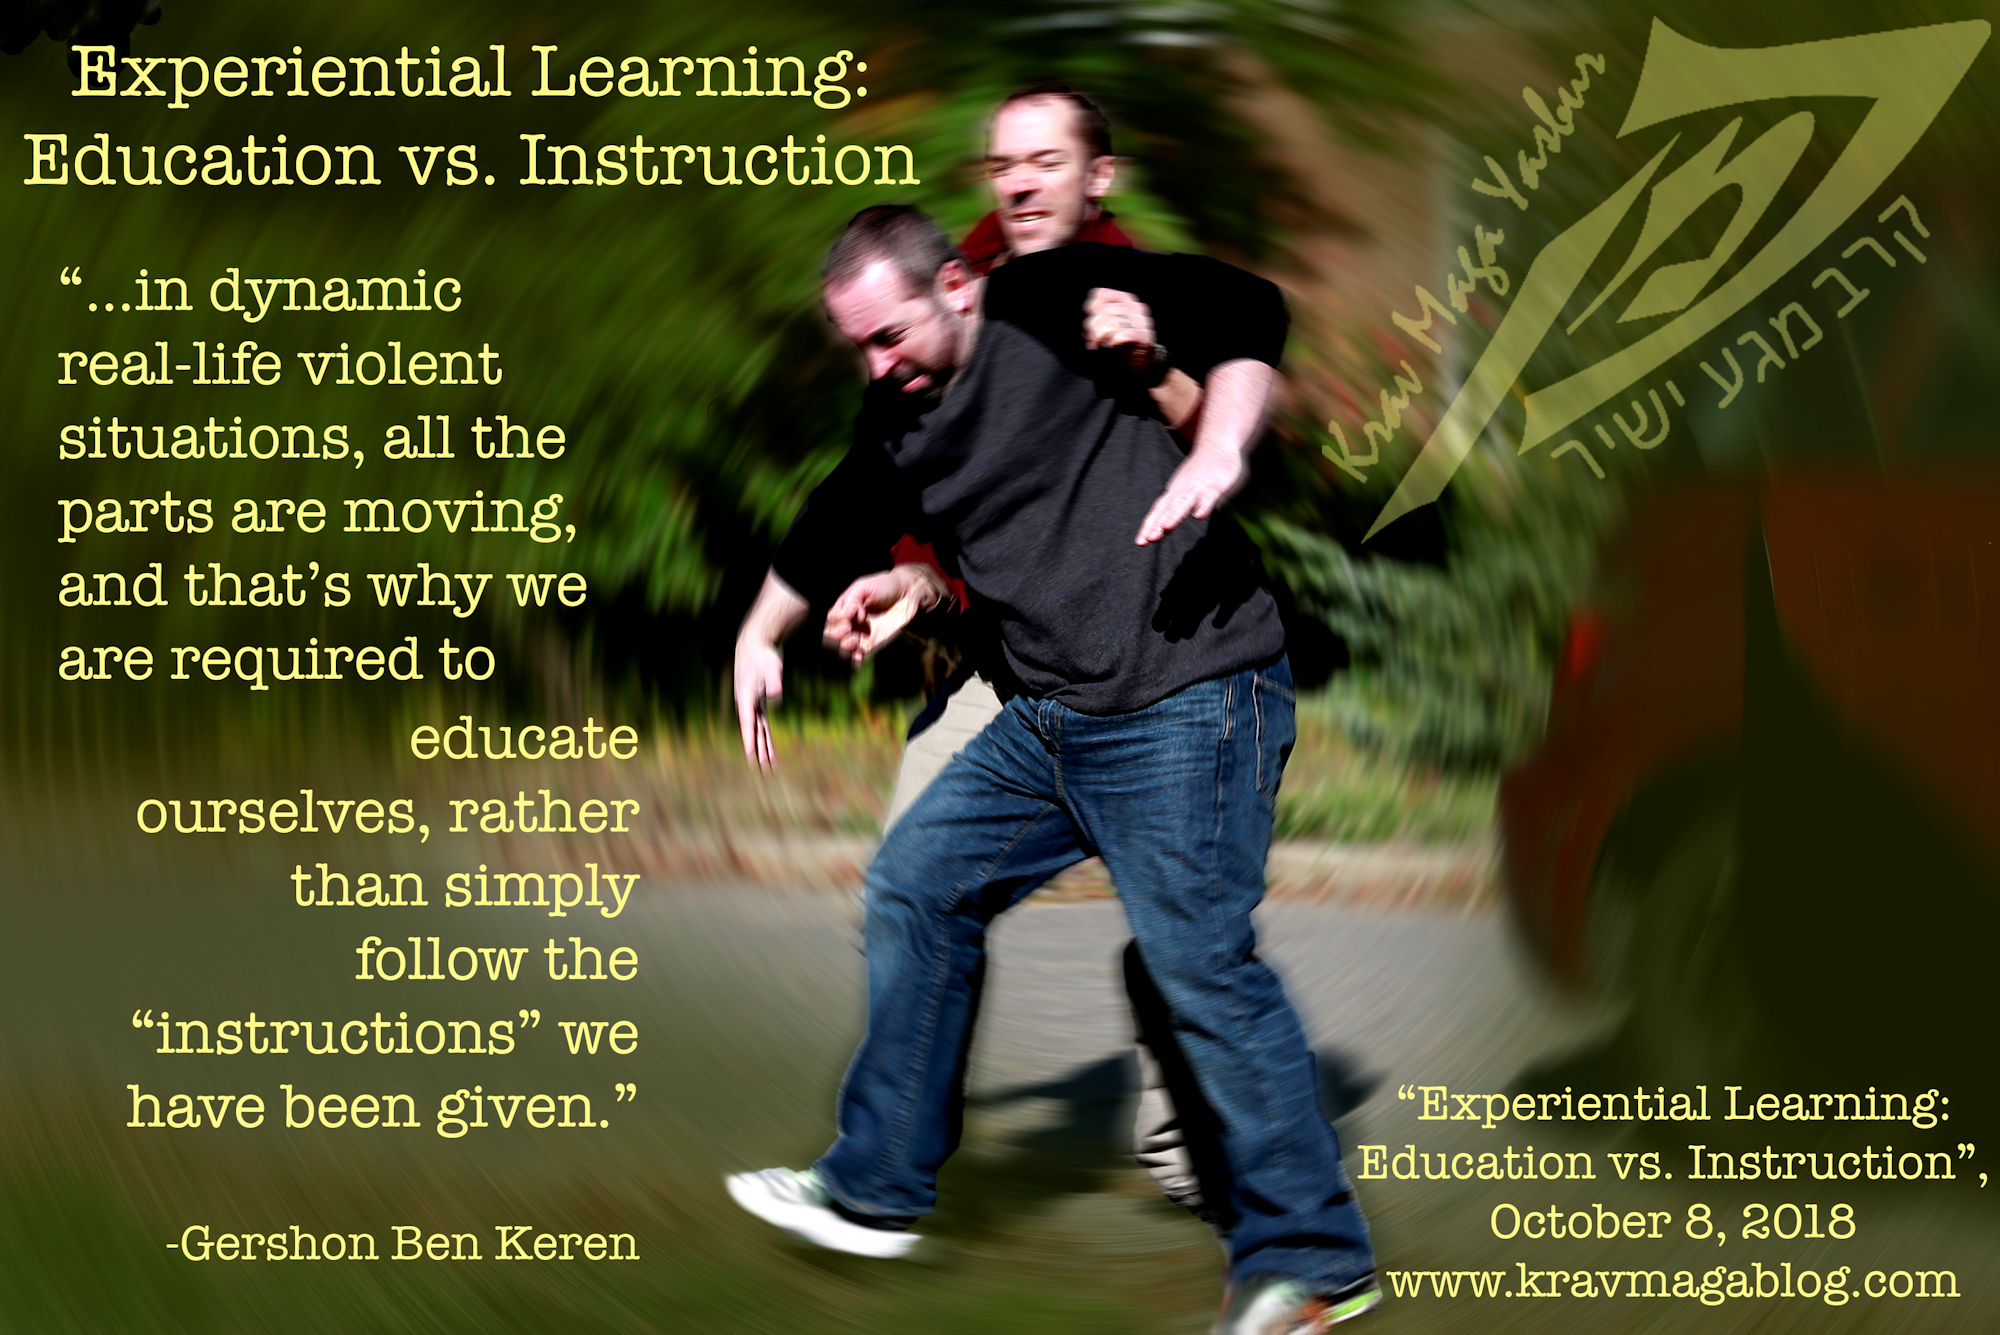 Blog About Experiential Learning: Education Versus Instruction